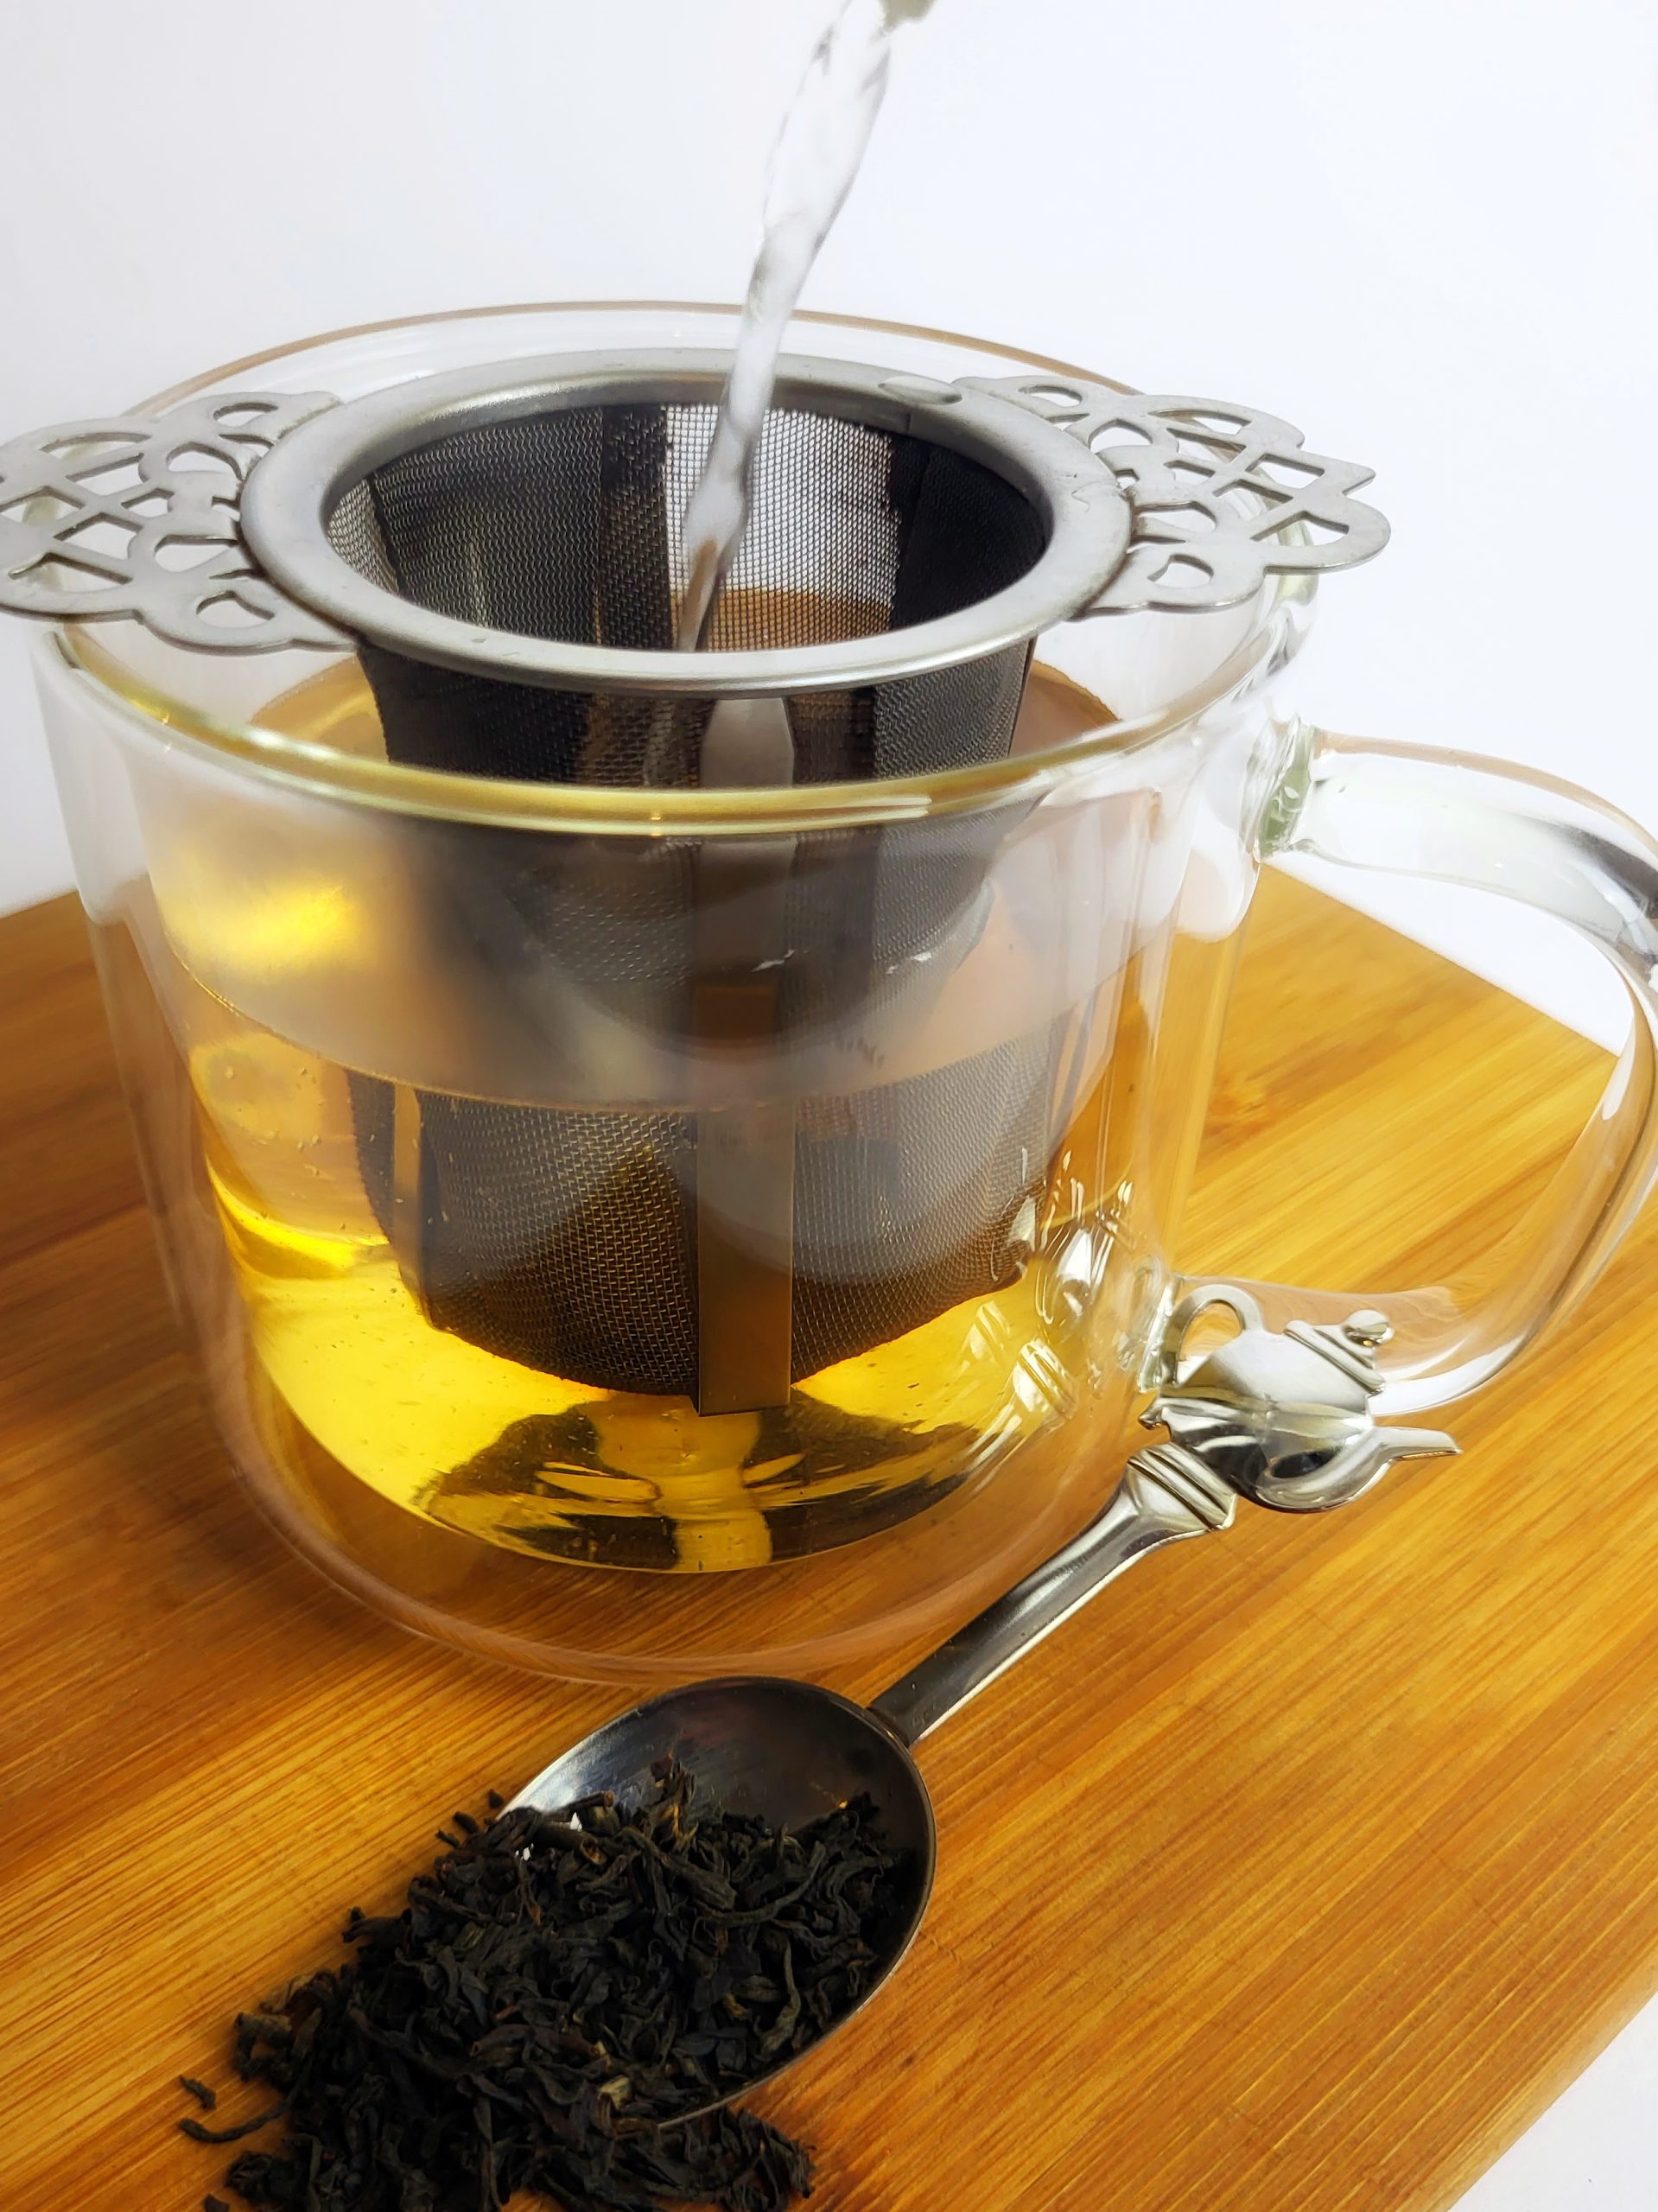 water being poured onto loose leaf tea leaves in a glass cup